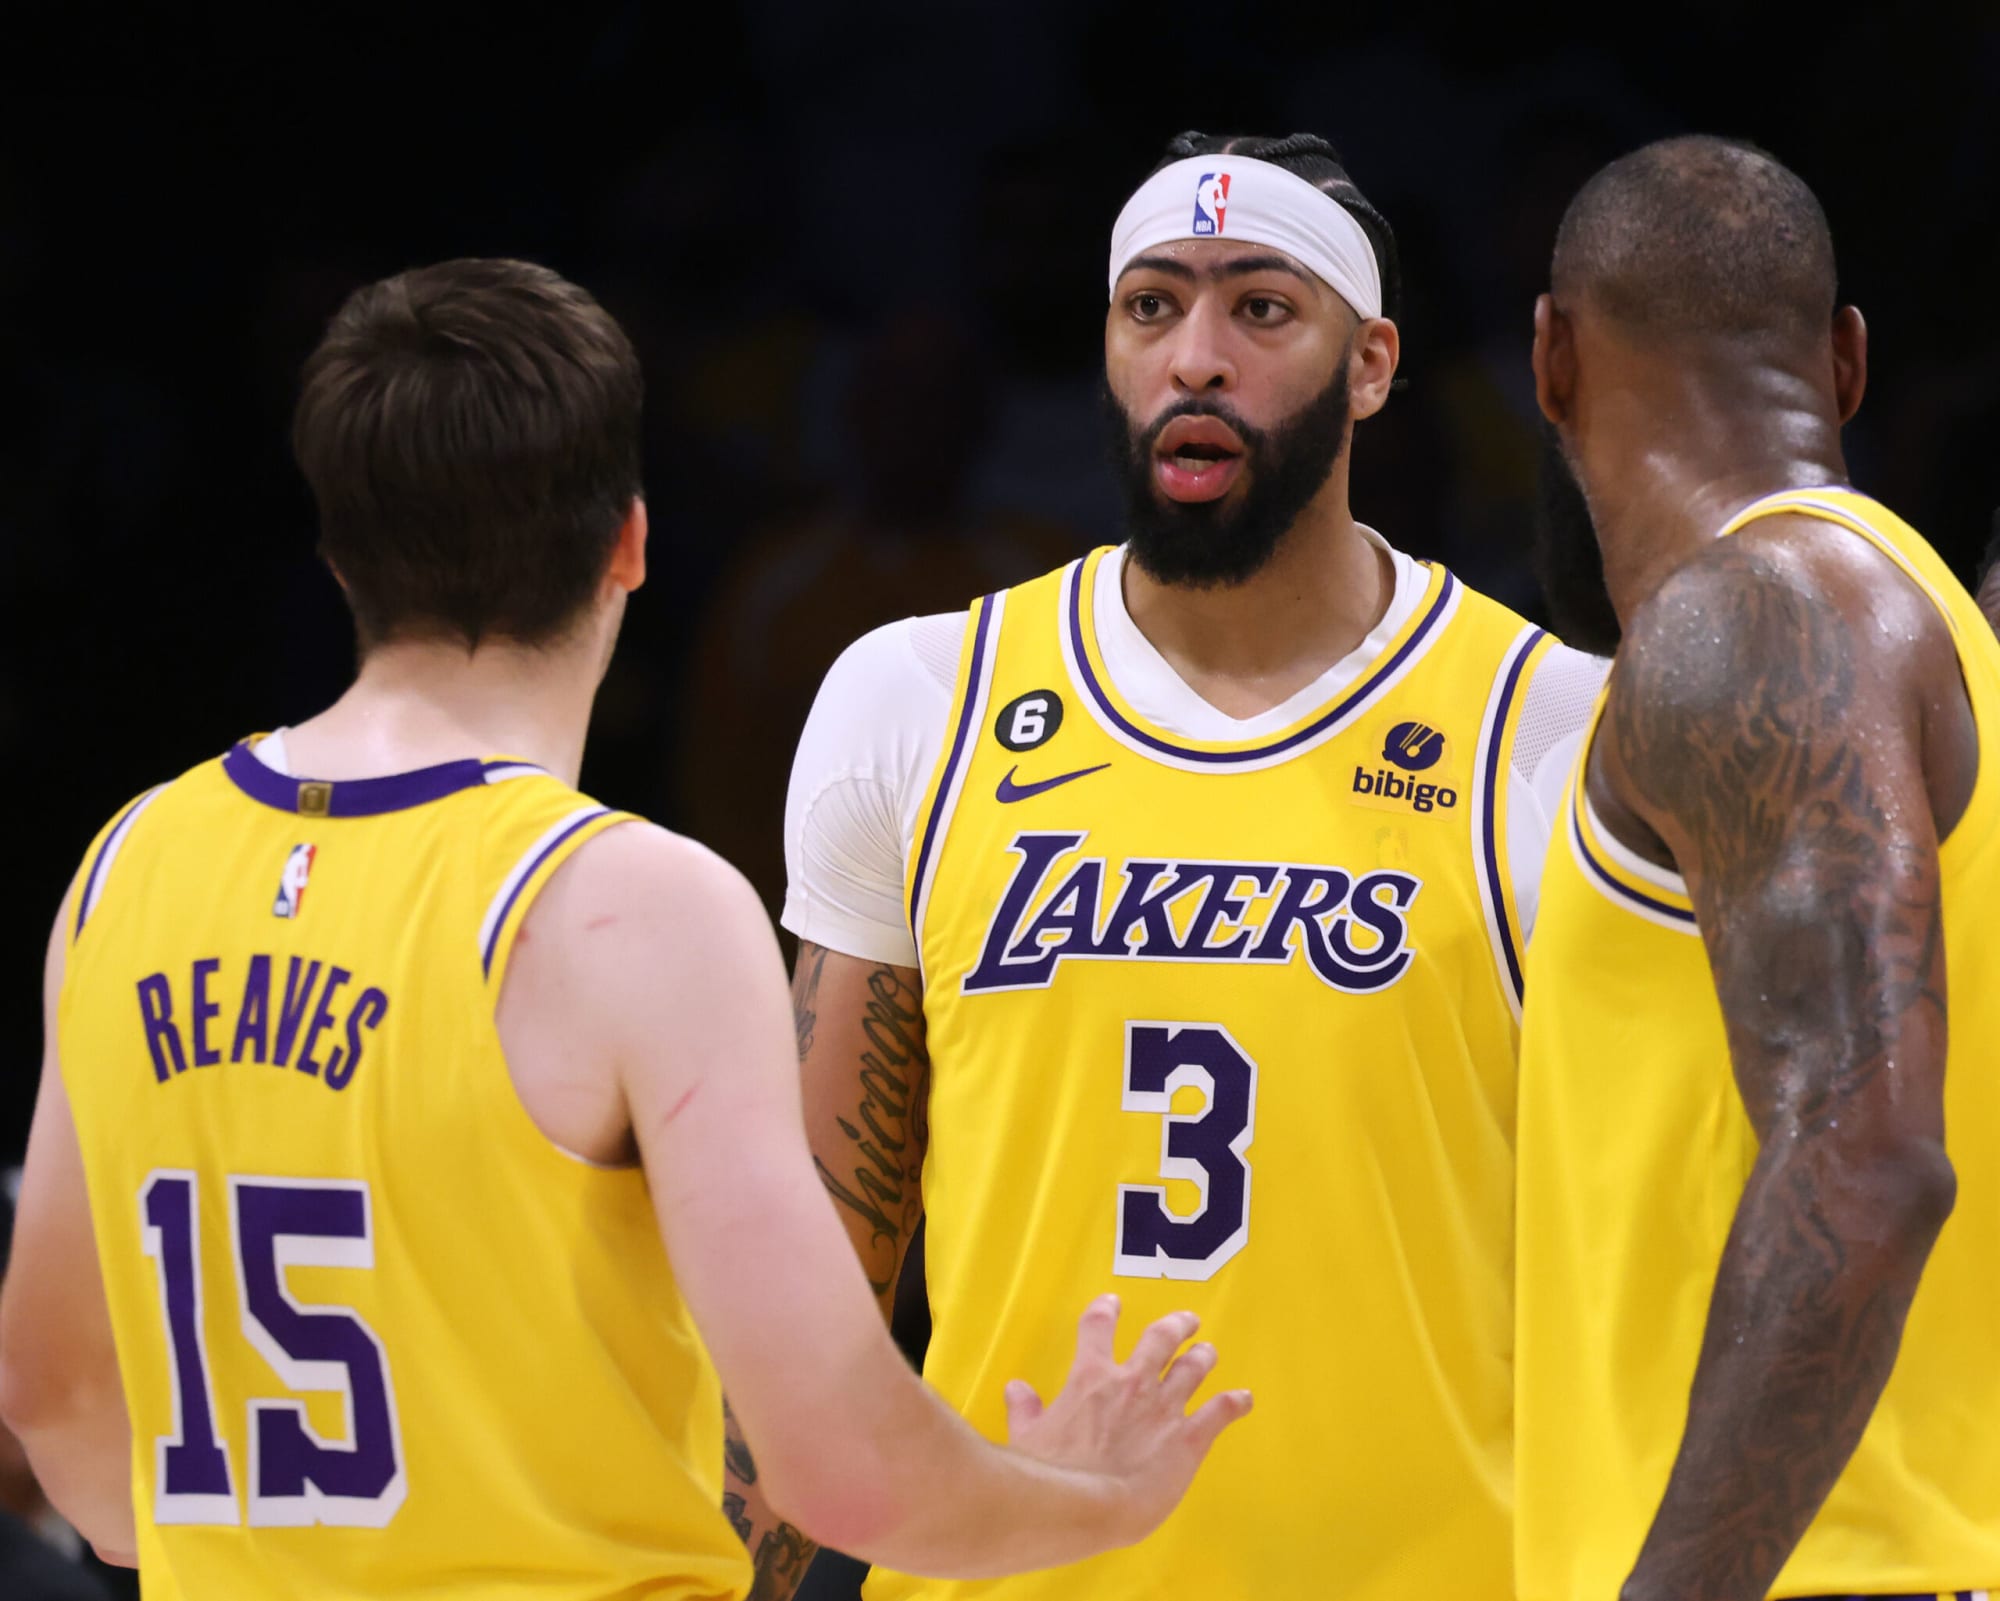 Lakers improved in NBA free agency, but they're still far from